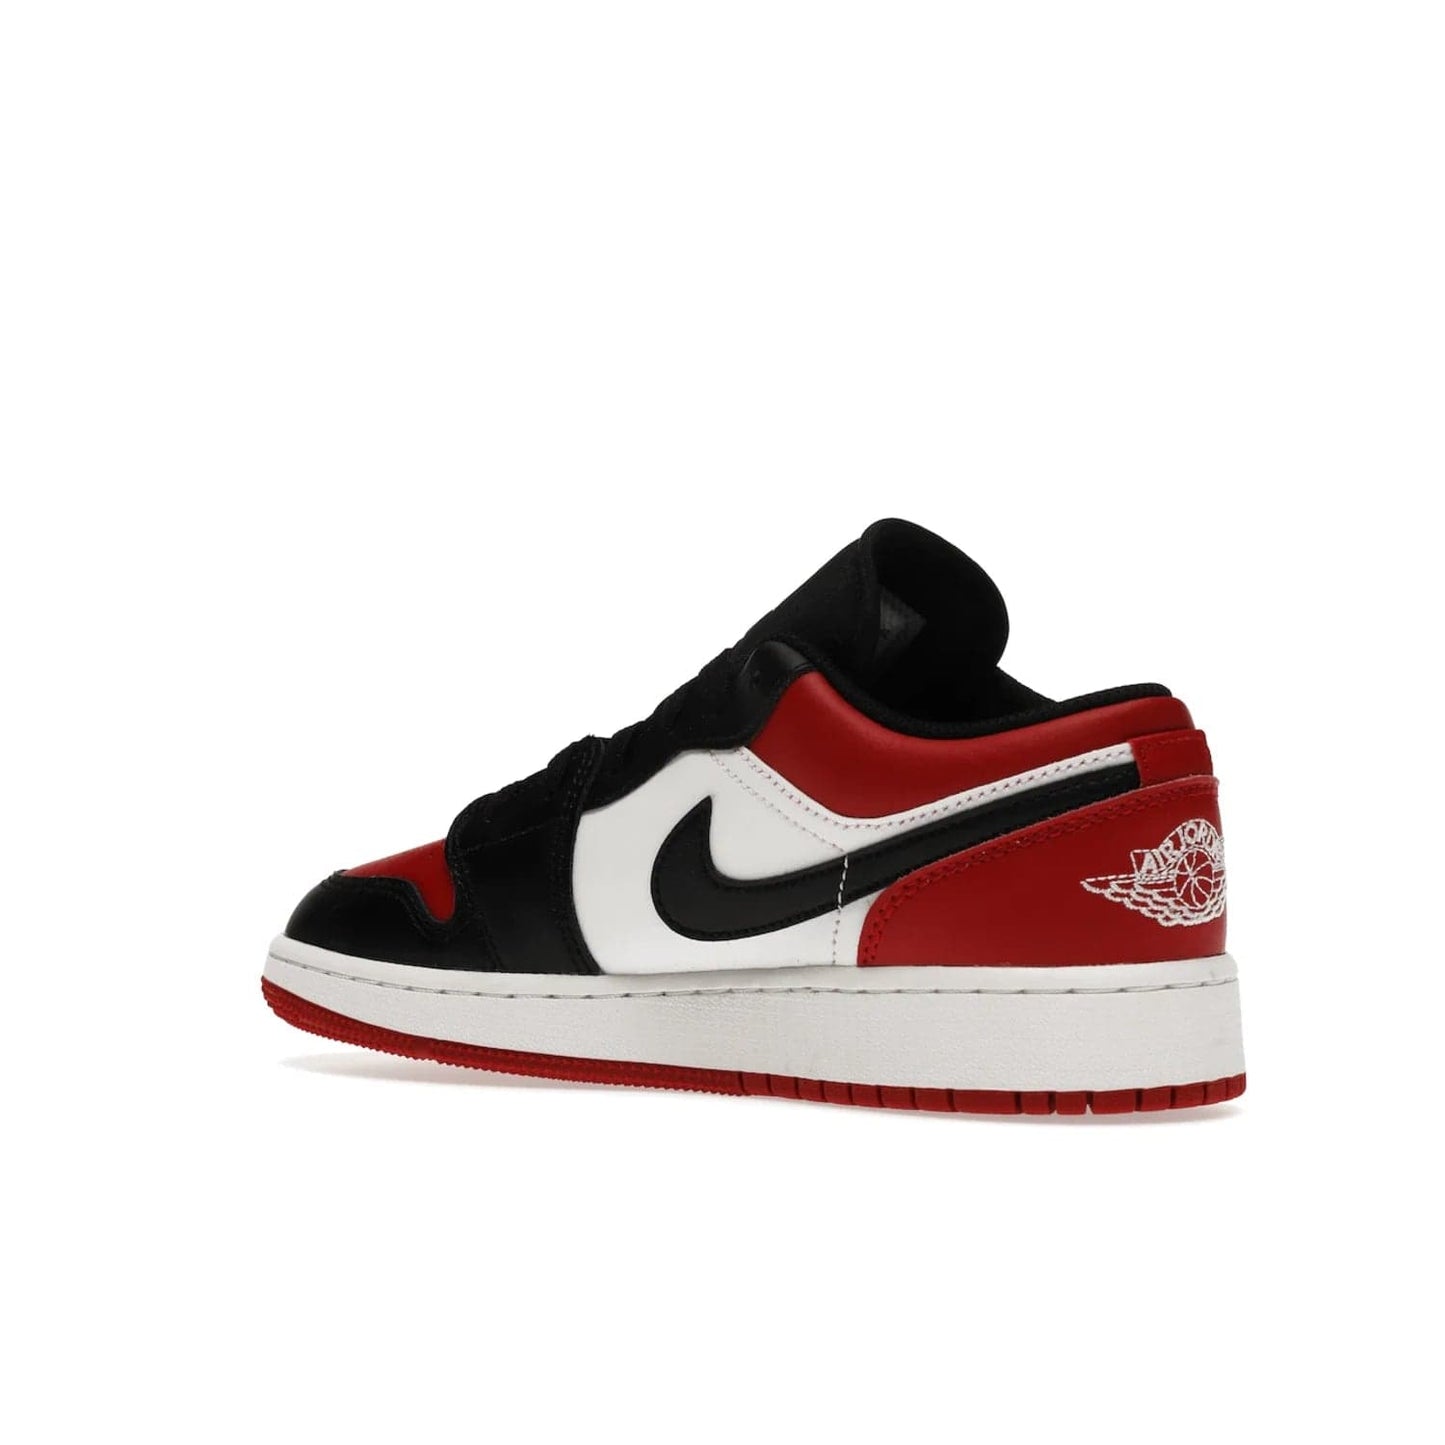 Jordan 1 Low Bred Toe (GS) - Image 23 - Only at www.BallersClubKickz.com - #
Iconic sneaker from Jordan brand with classic colorway, unique detailing & Air Jordan Wings logo. Step into the shoes of the greats with the Jordan 1 Low Bred Toe GS!